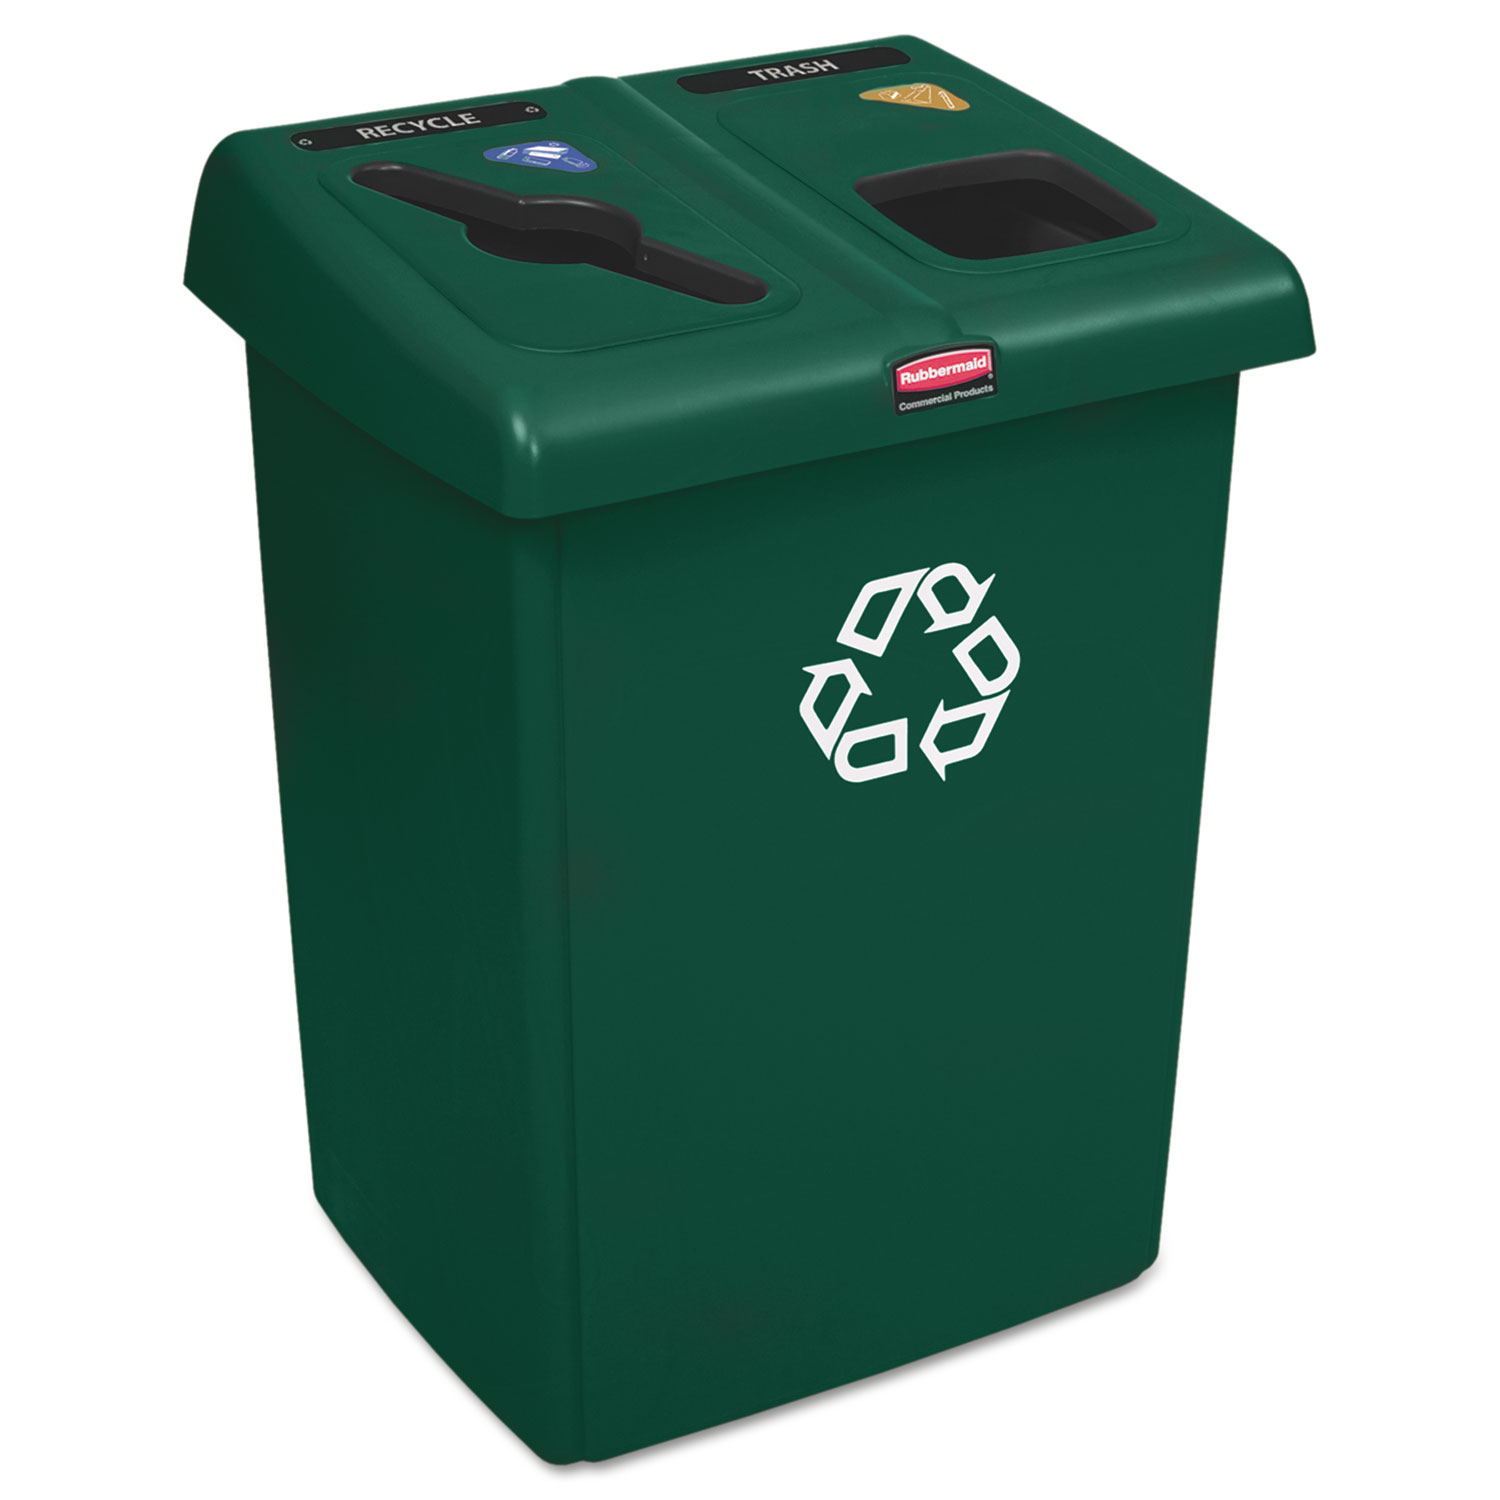  Rubbermaid Commercial 1792340 Glutton Recycling Station, Two-Stream, 46 gal, Green (RCP1792340) 